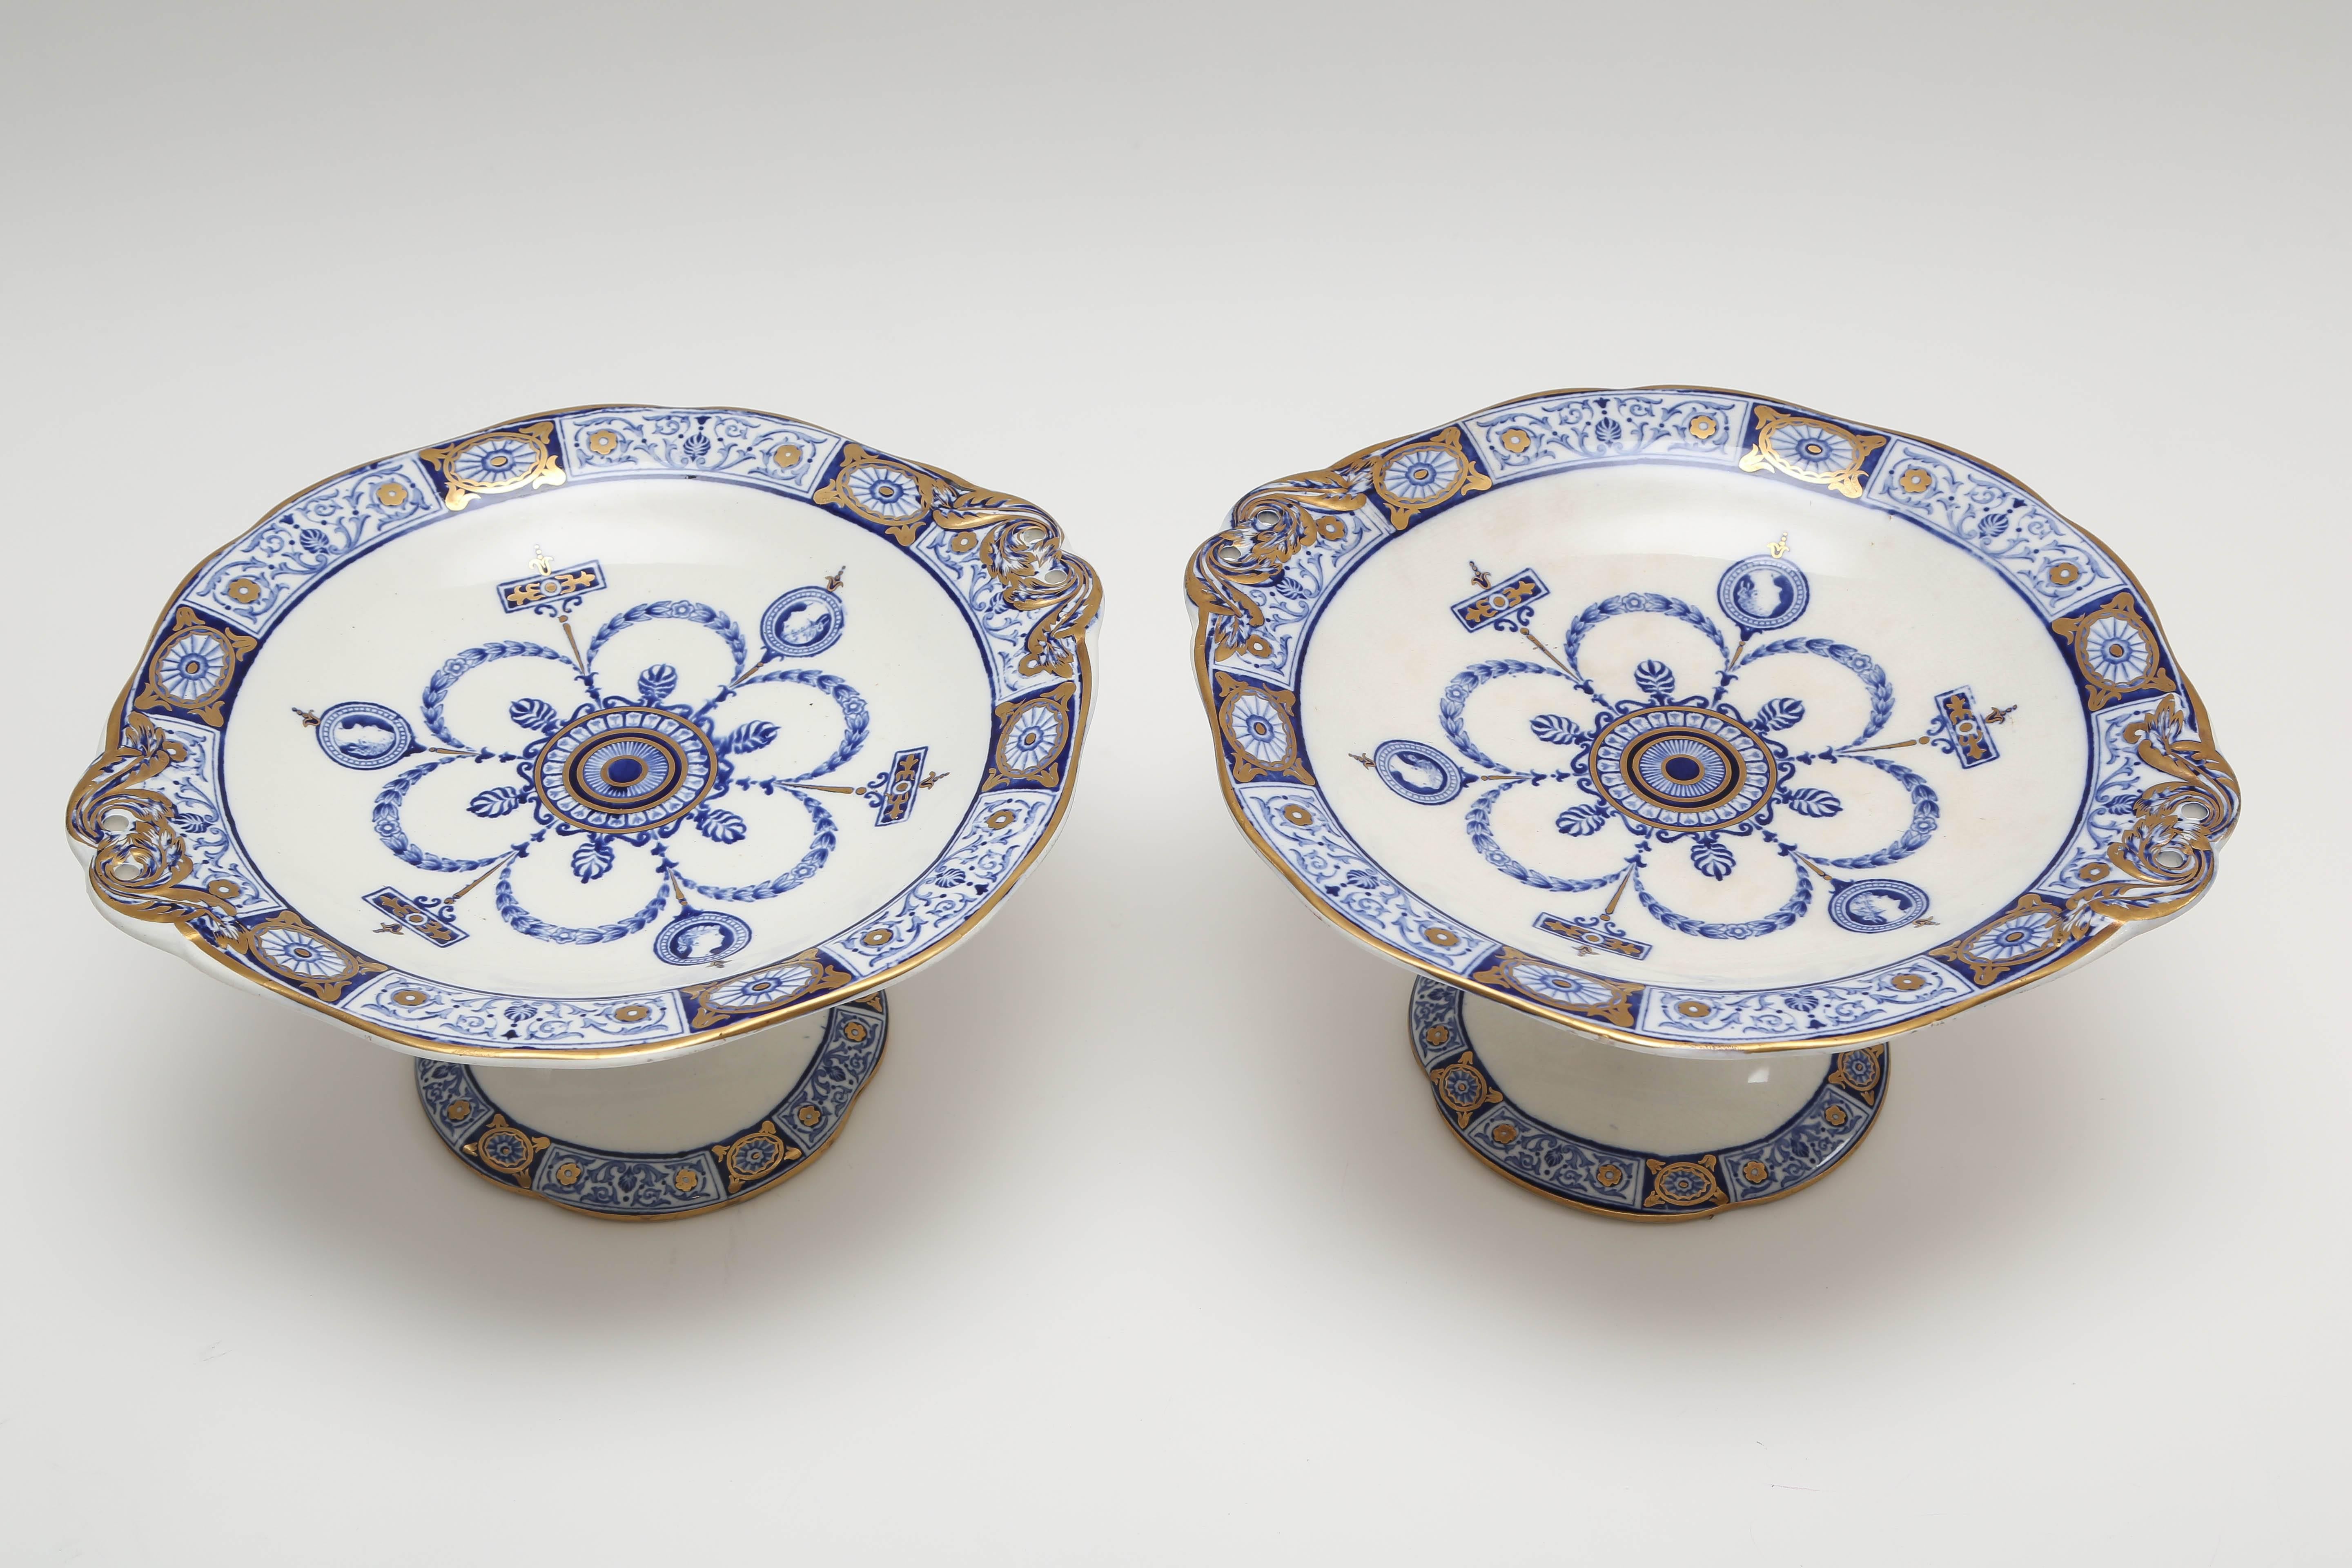 Aesthetic Movement Pair of 19th Century Wedgwood England Dessert Compotes or Tazzas, Blue and Gold